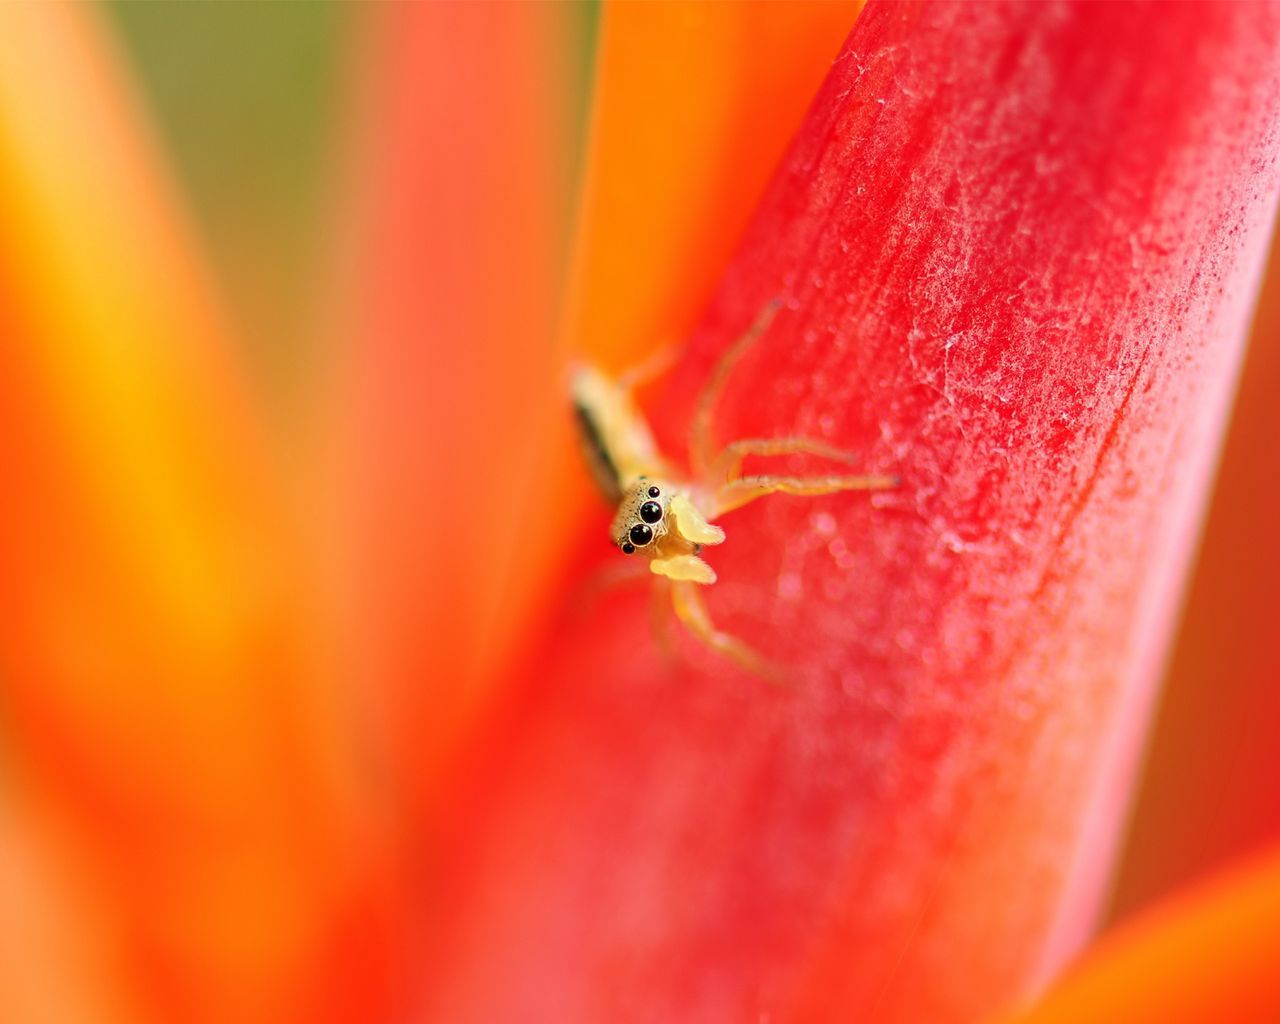 Download wallpaper 1280x1024 spider, small, petals, bright, eyes standard 5:4 HD background